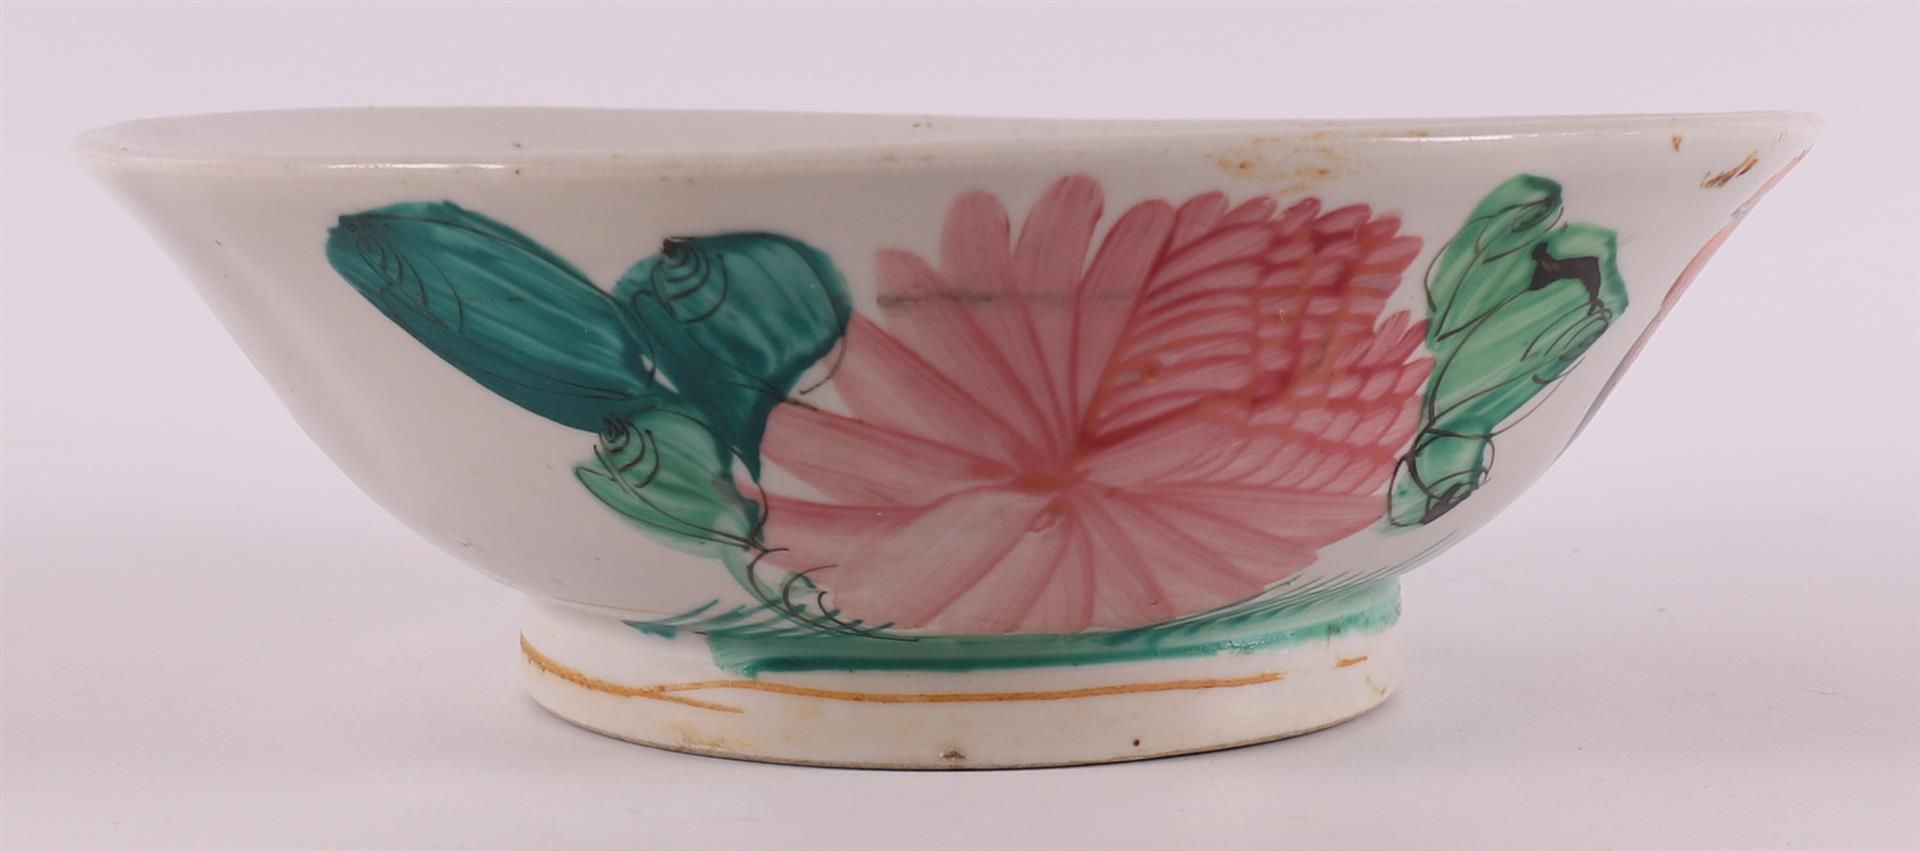 A blue/white and capucine porcelain bowl, China around 1900. - Image 6 of 10